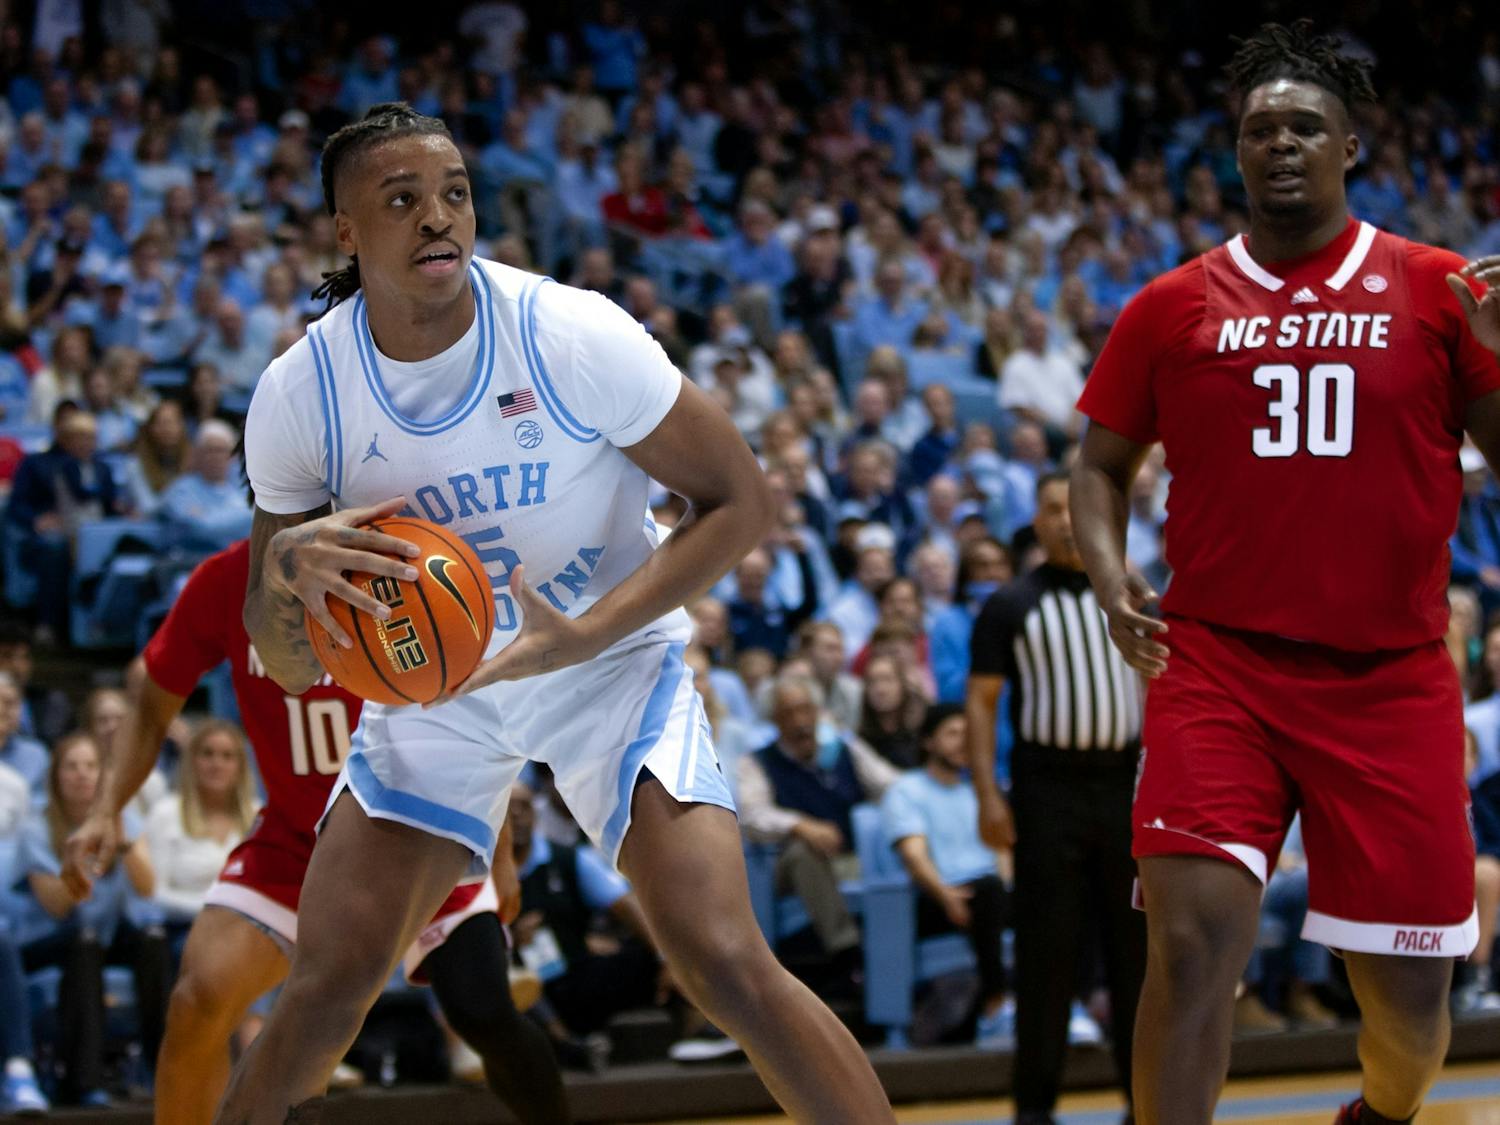 UNC senior forward/center Armando Bacot (5) catches a rebound in the Dean Smith Center on Jan. 21, 2023, against the N.C. State Wolfpack. Bacot set a new record for career rebounds, breaking Tyler Hansbrough’s previous record. UNC won 80-69.